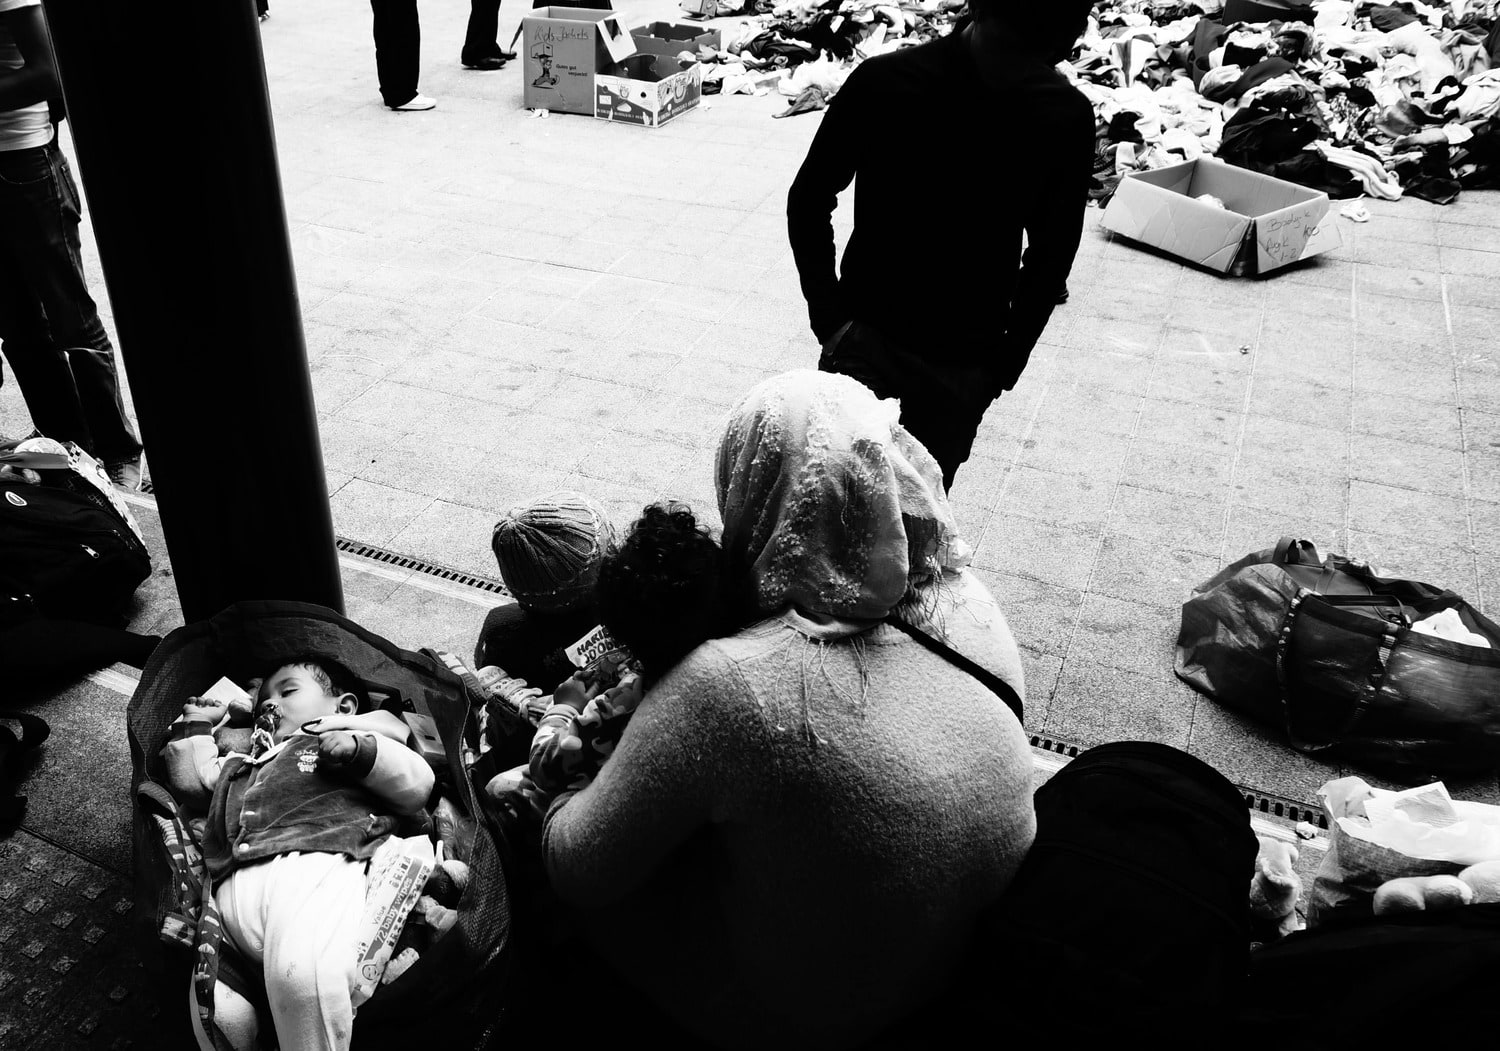 europe, réfugiés, refugees, tour d'europe, travel, black and white, photographs, street photography